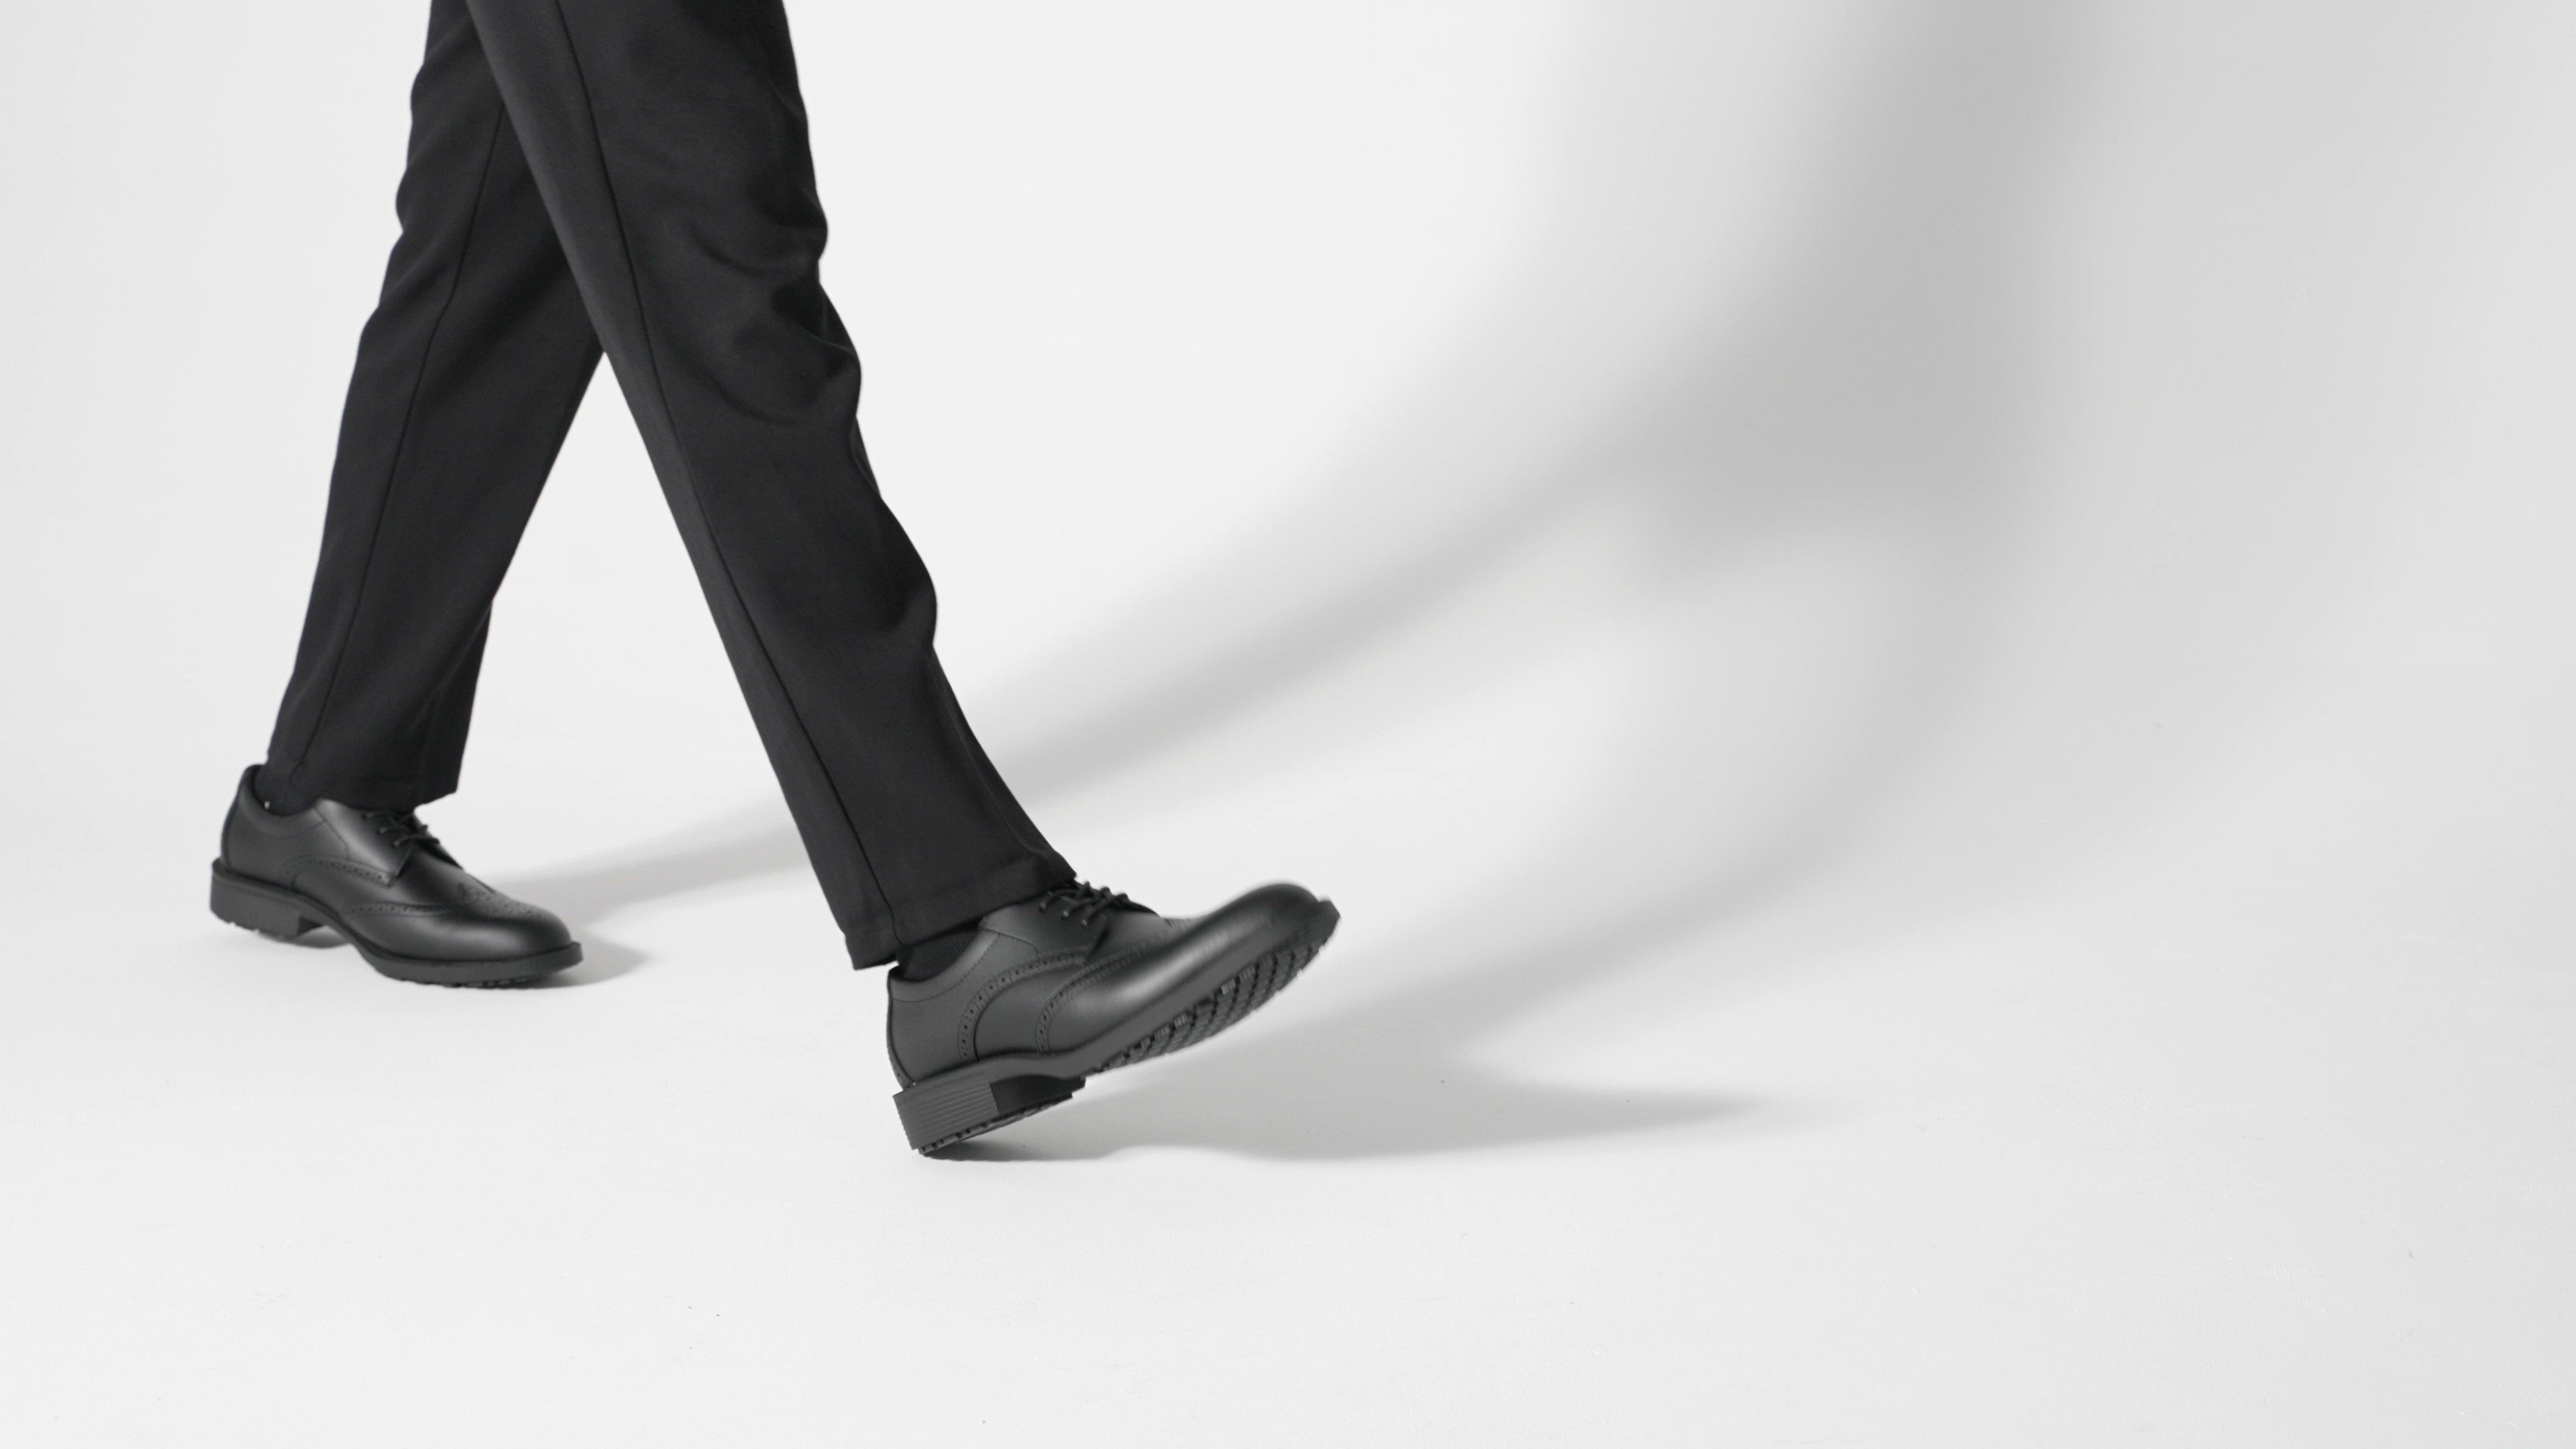 The Executive Wing Tip IV from Shoes For Crews, is an slip resistant dress shoe with a water resistant breathable leather upper to provide industry leading levels of grip and durability, product video.